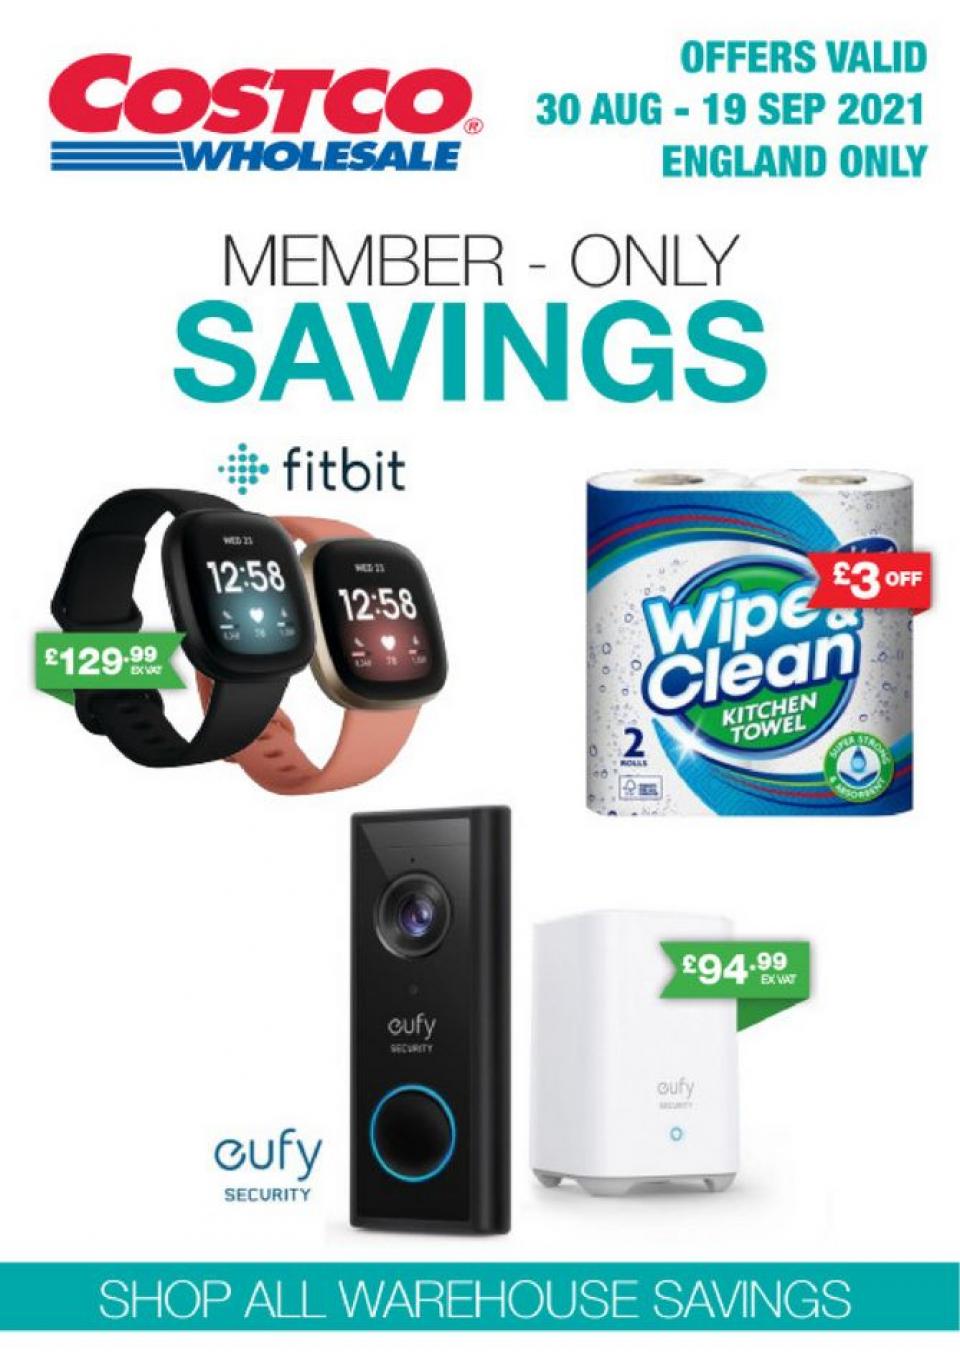 Costco Offers Member-Only Savings 30 Aug – 19 Sep 2021